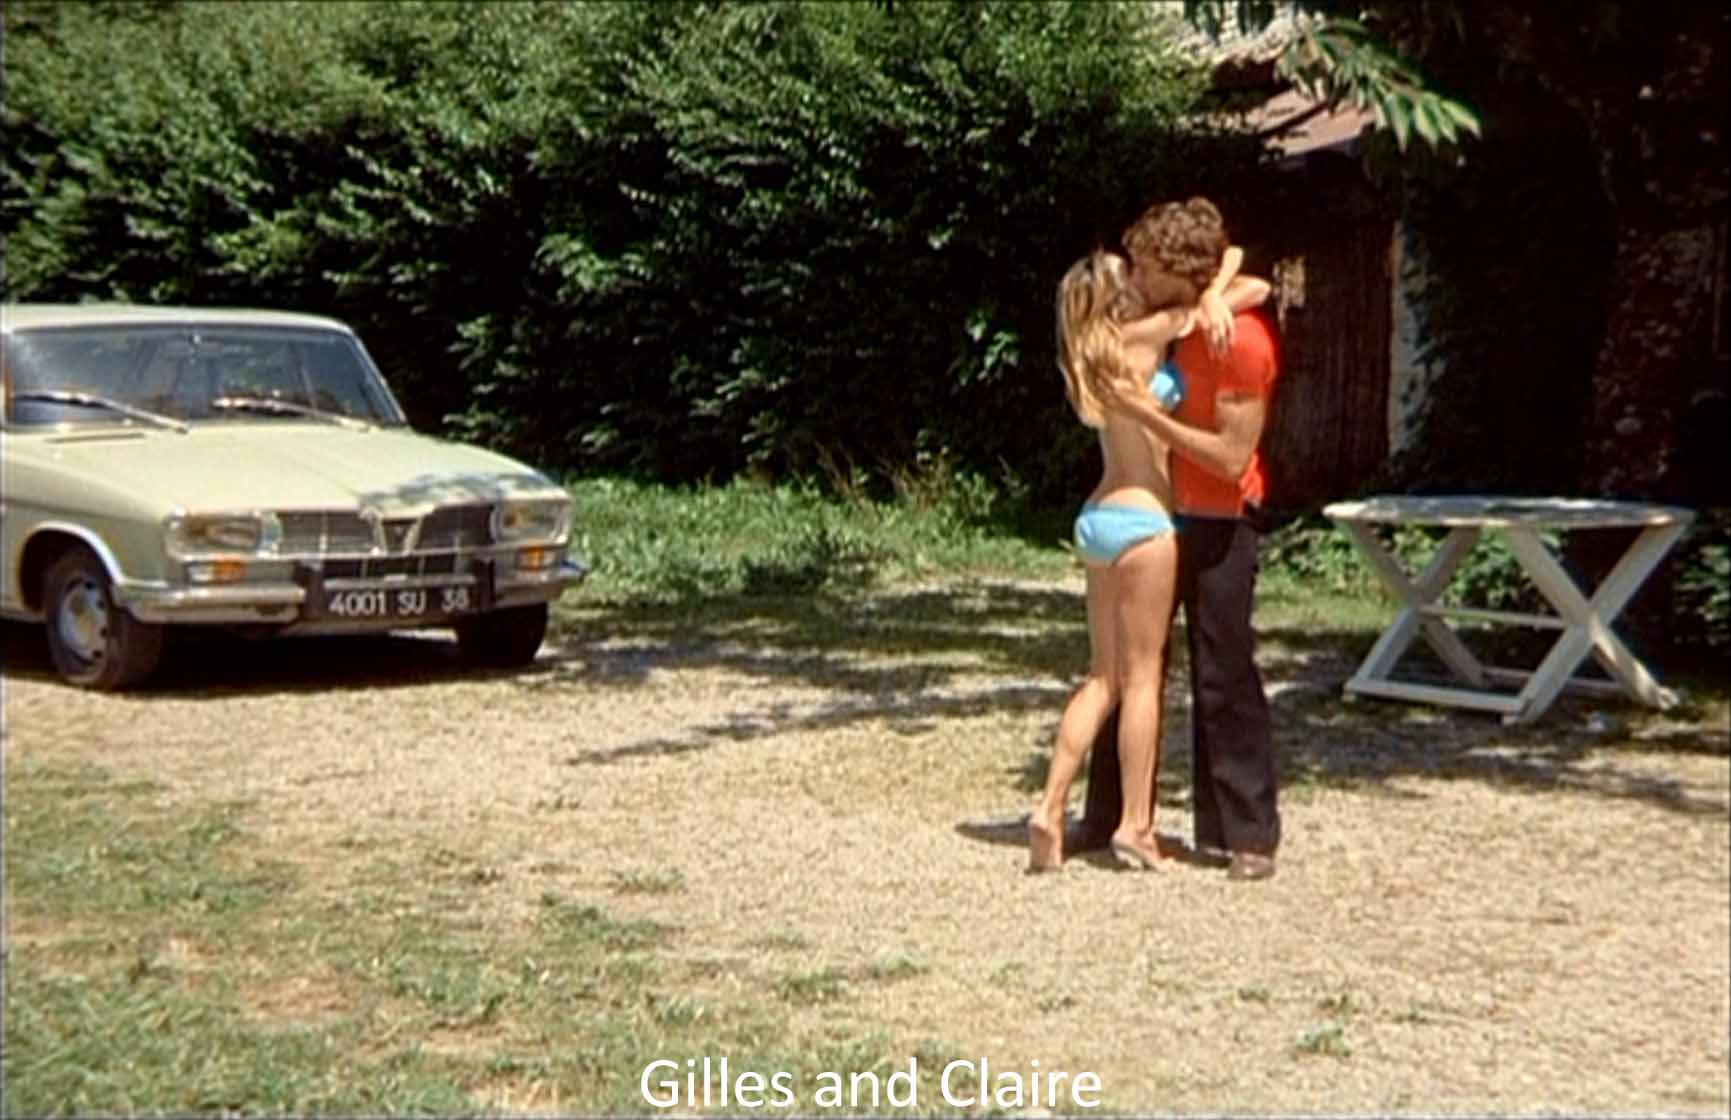 Gilles and Claire